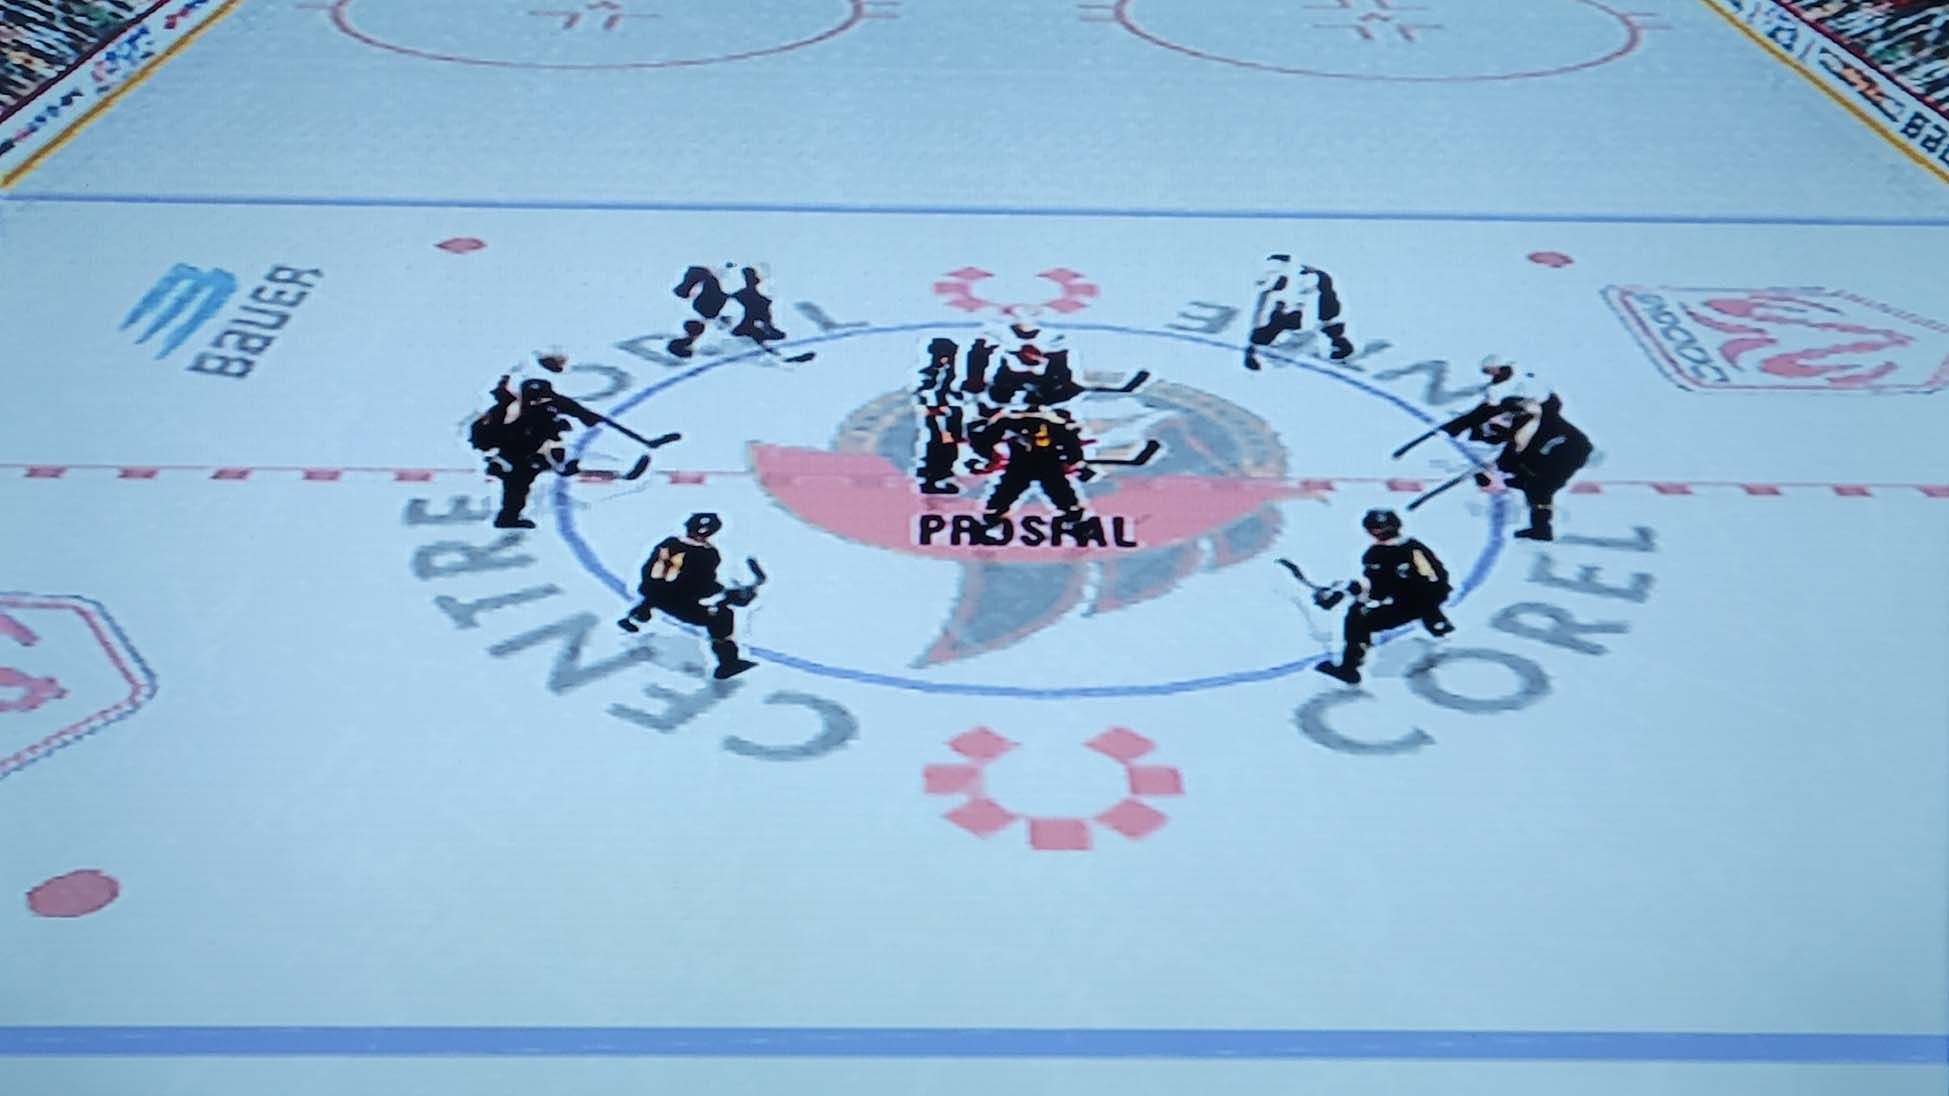 The Ottawa Senators and the New Jersey Devils get set for a faceoff